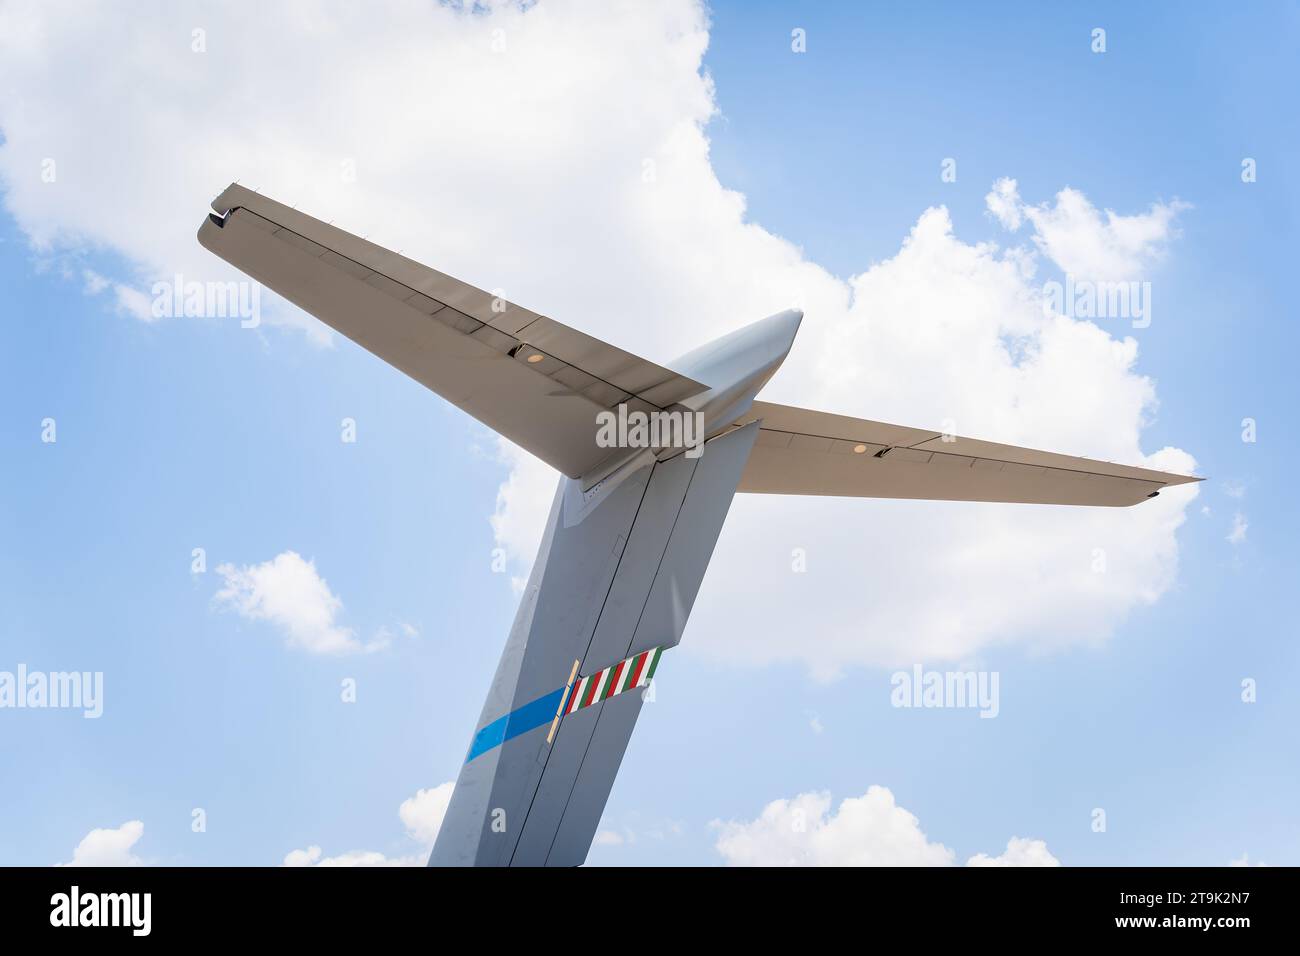 Close up detail with the stabilizers, ailerons, rudders and elevators of a plane Stock Photo